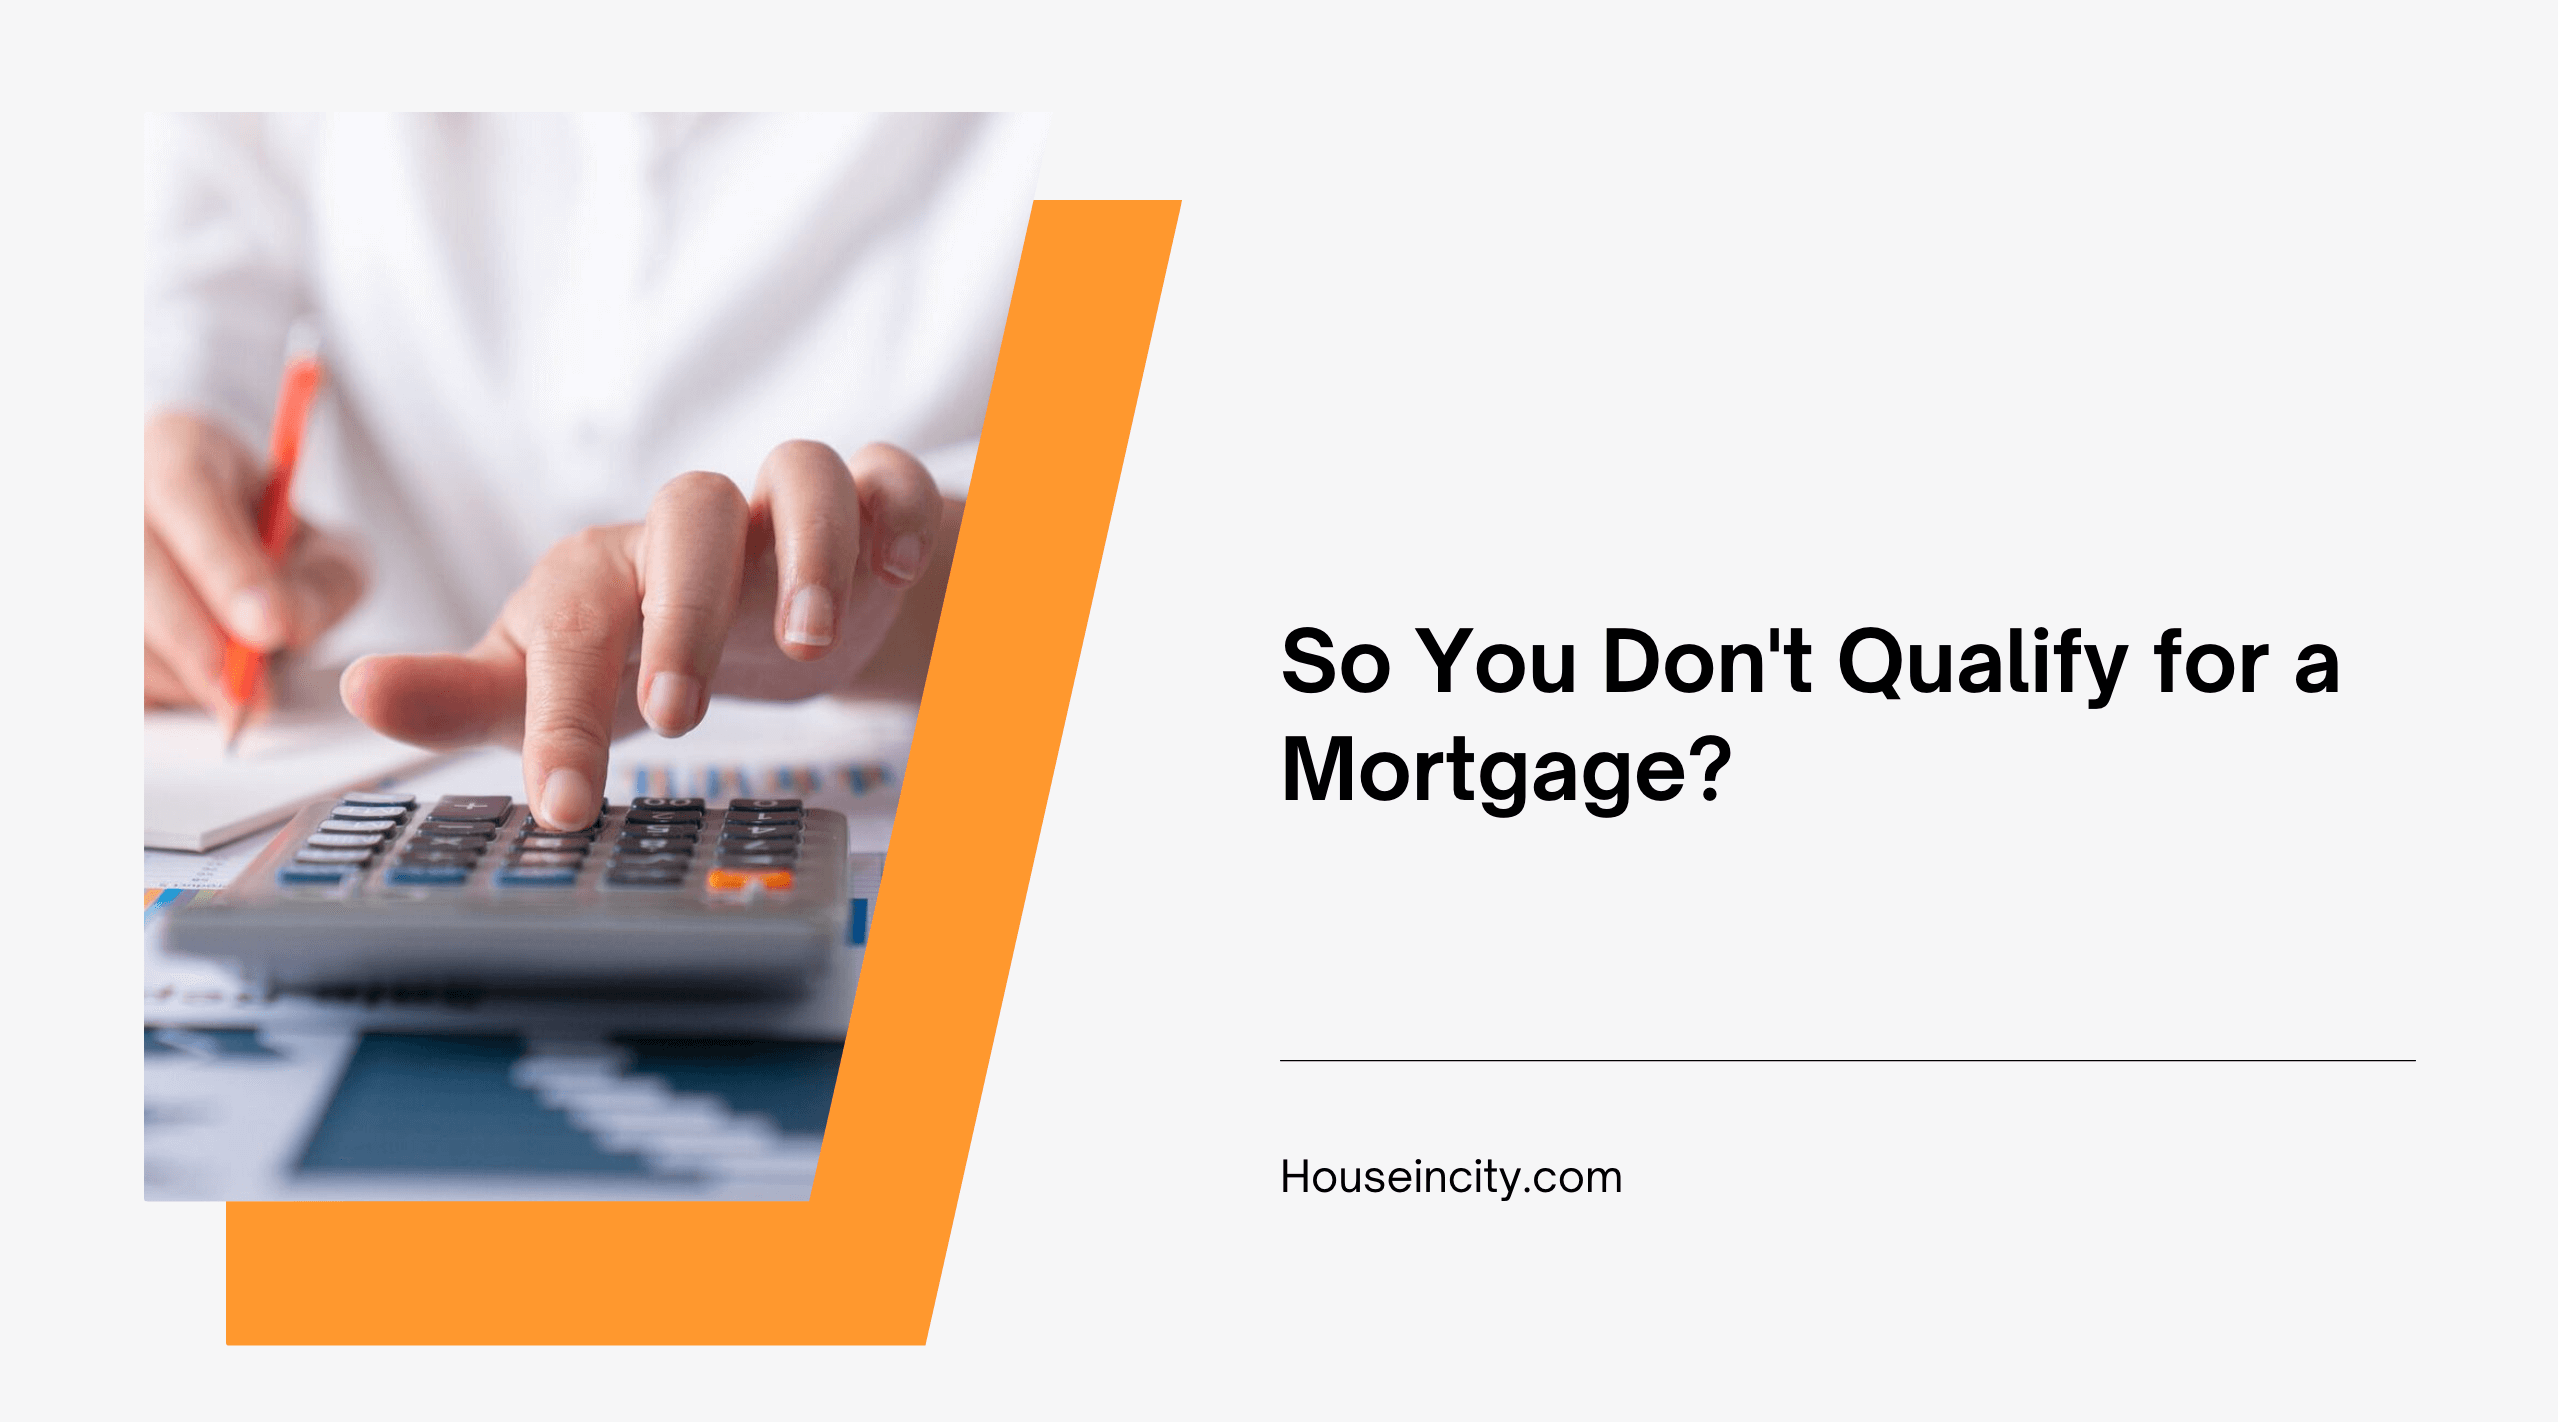 So You Don't Qualify for a Mortgage?